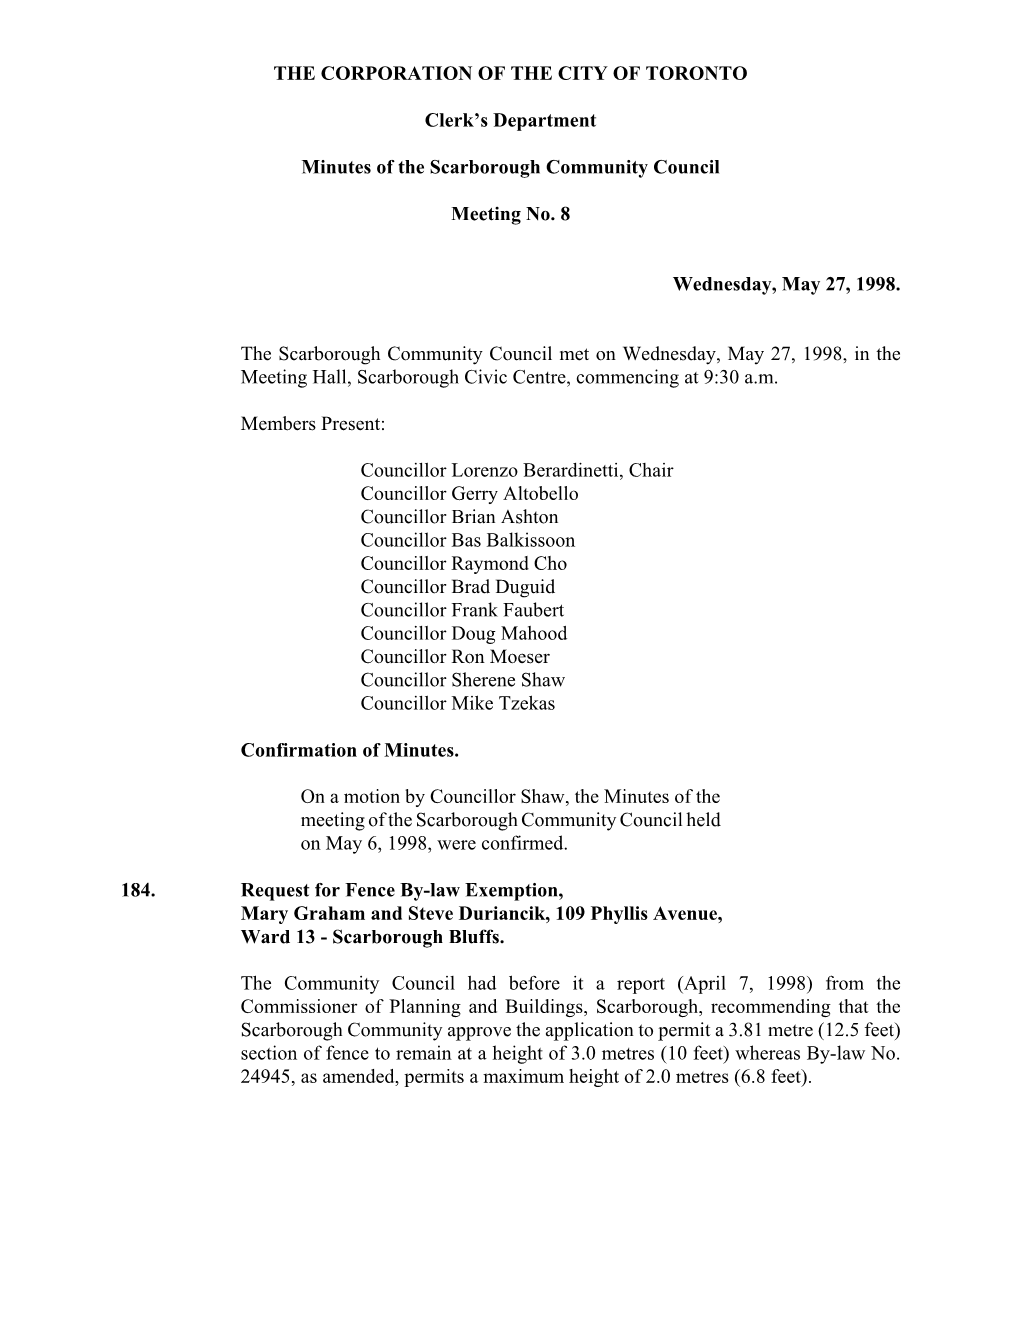 THE CORPORATION of the CITY of TORONTO Clerk's Department Minutes of the Scarborough Community Council Meeting No. 8 Wednesday